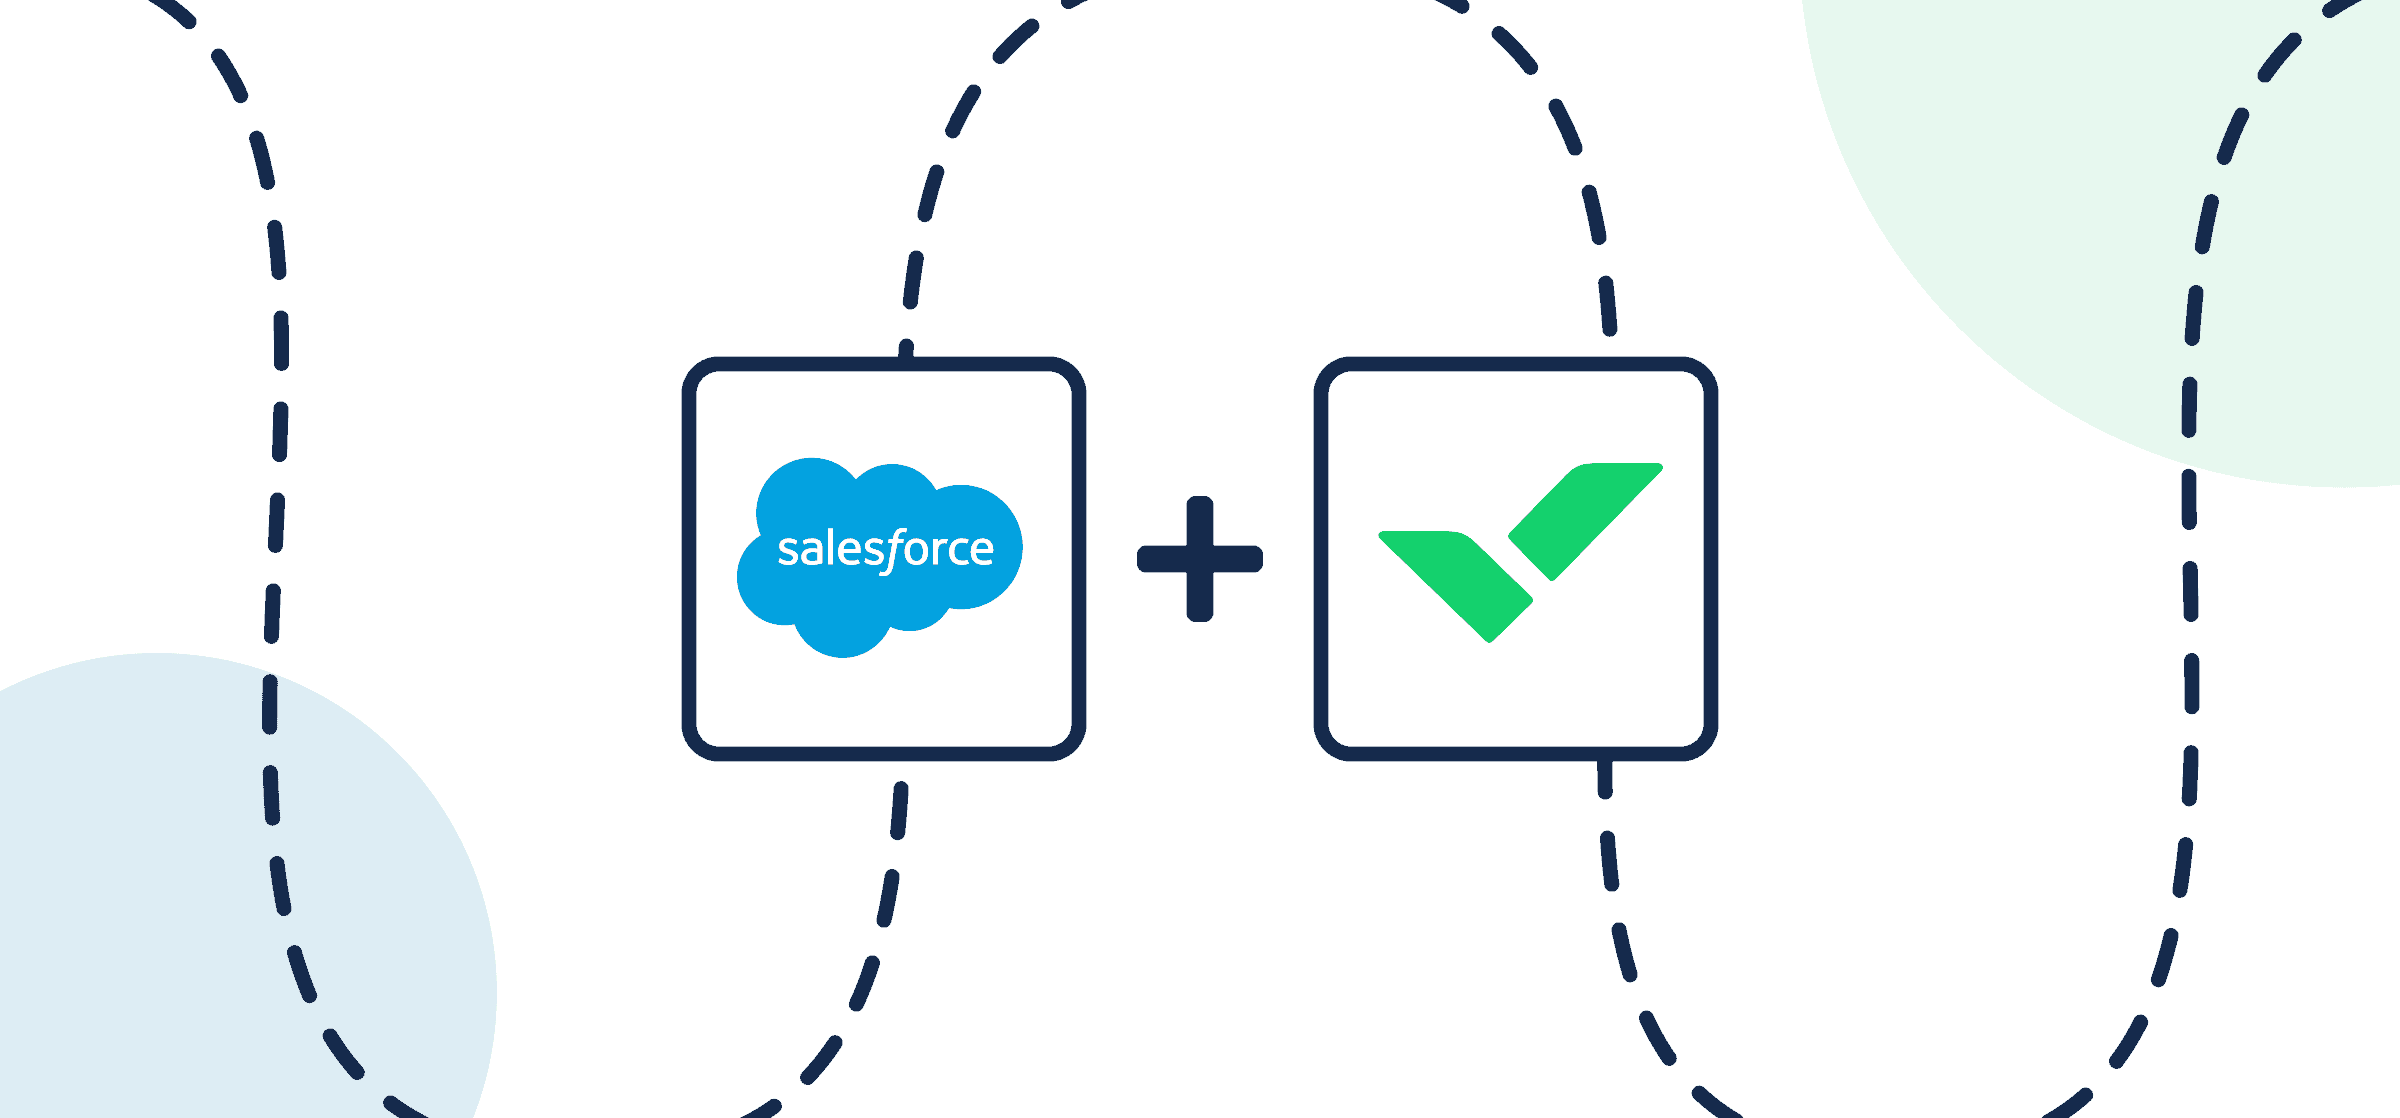 Featured image displaying the logos of Salesforce and Wrike in Unito's guide to setting up a simple Two-Way Sync.